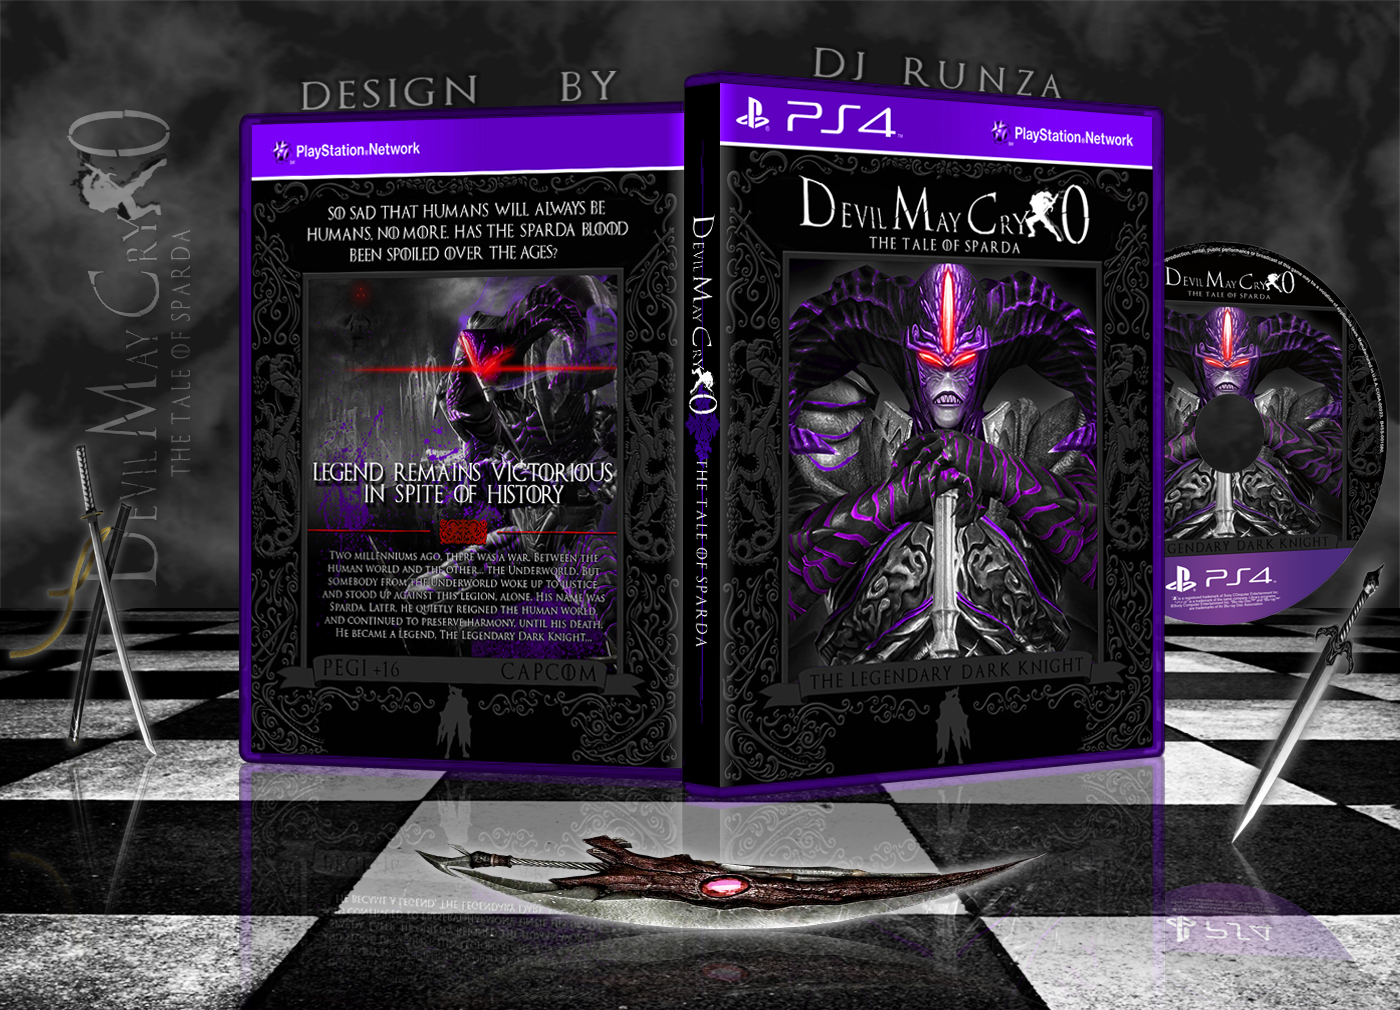 Devil May Cry 0: The Tale Of Sparda box cover